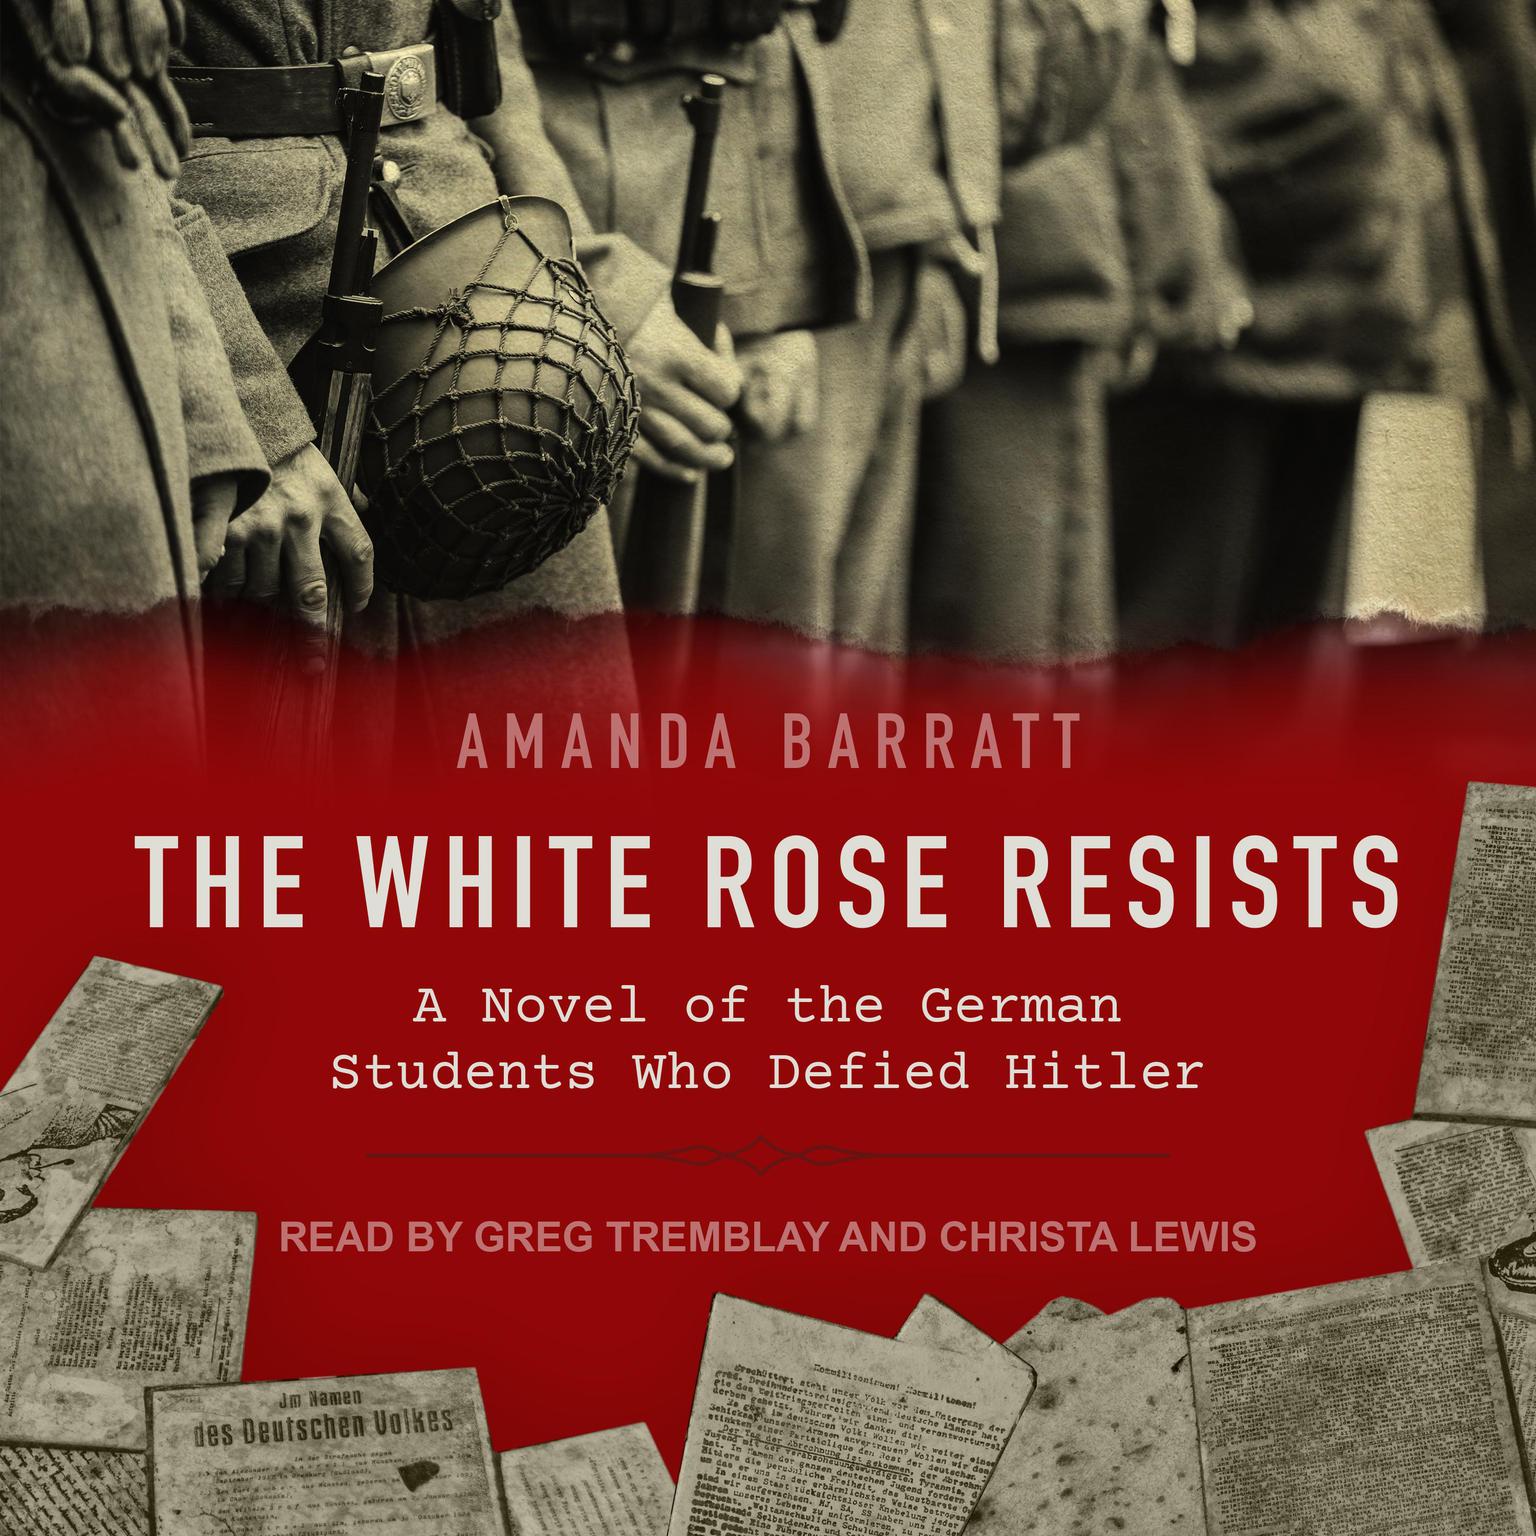 The White Rose Resists: A Novel of the German Students Who Defied Hitler Audiobook, by Amanda Barratt